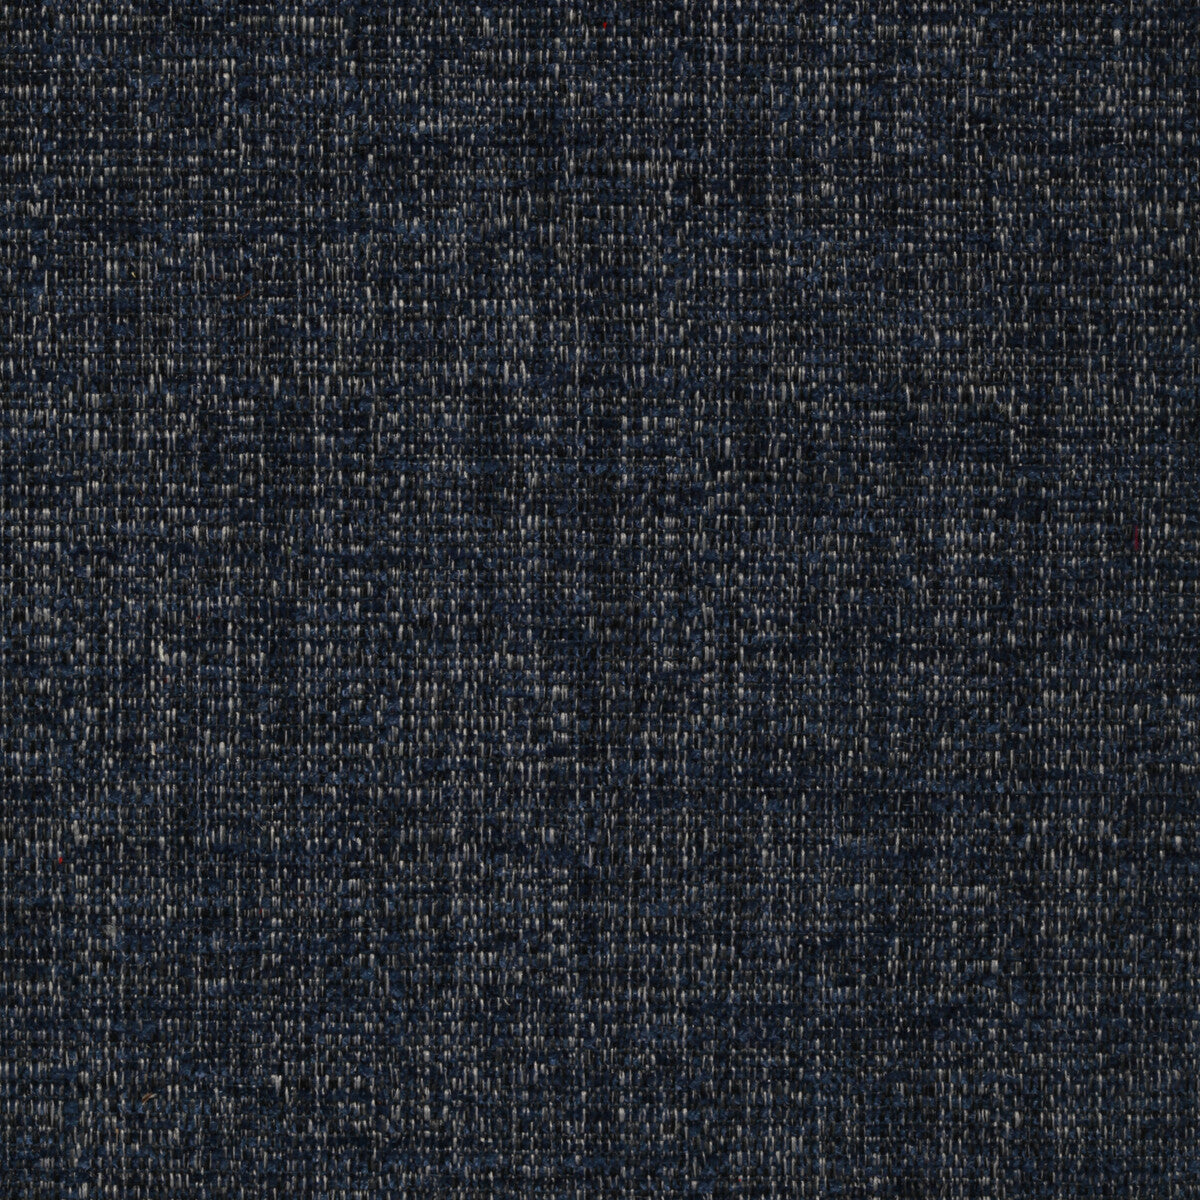 Kravet Contract fabric in 35128-50 color - pattern 35128.50.0 - by Kravet Contract in the Crypton Incase collection